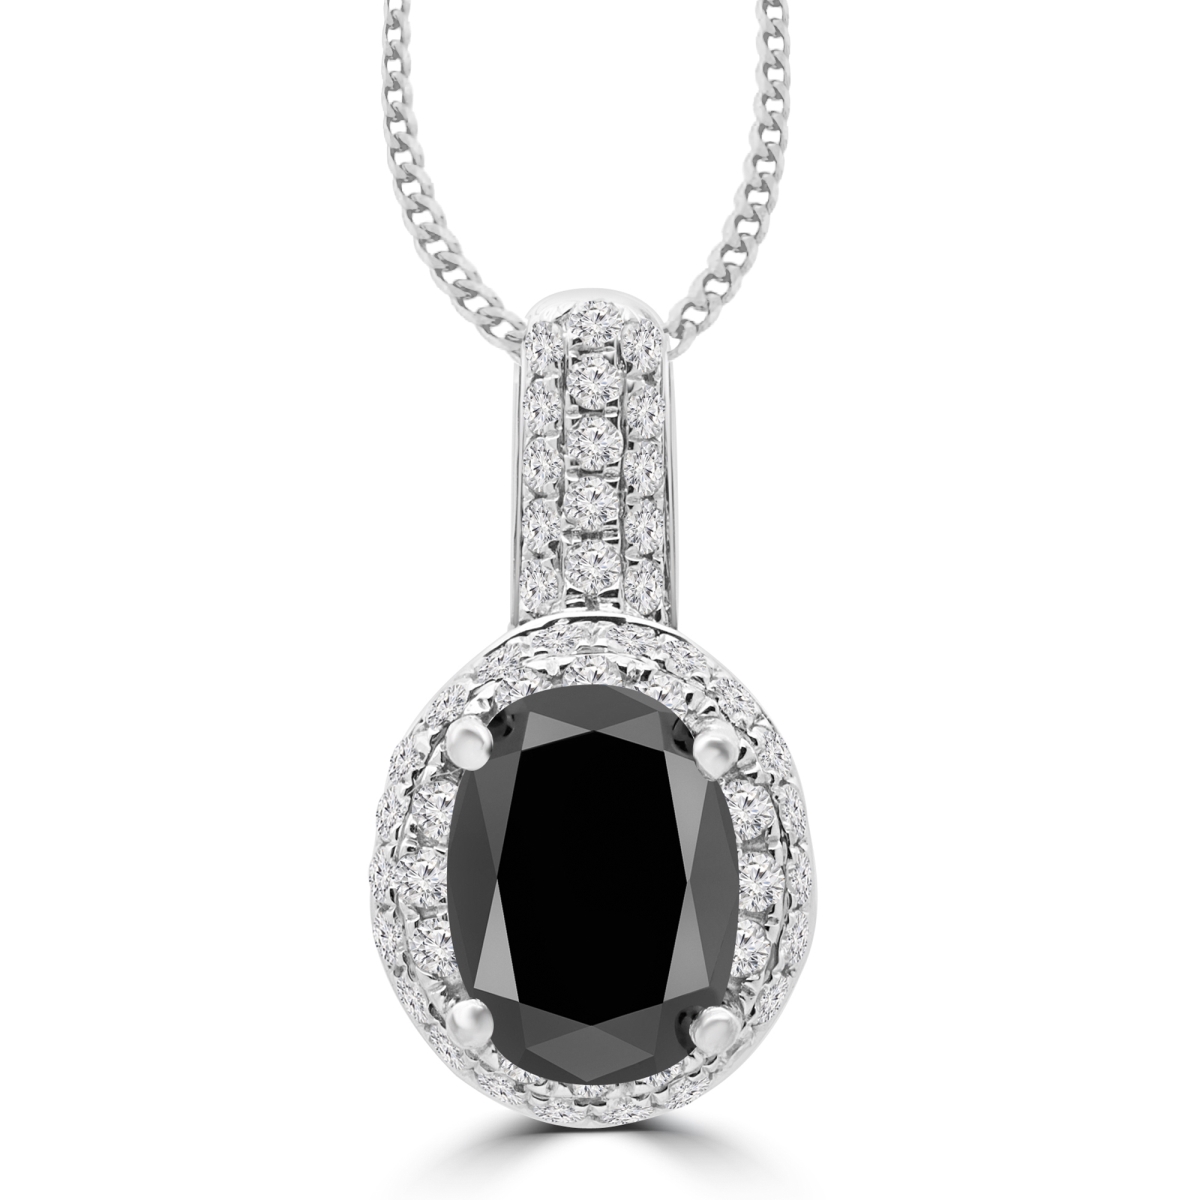 Md170453 3.25 Ctw Round Black Diamond Halo Pendant Necklace In 14k White Gold With Chain